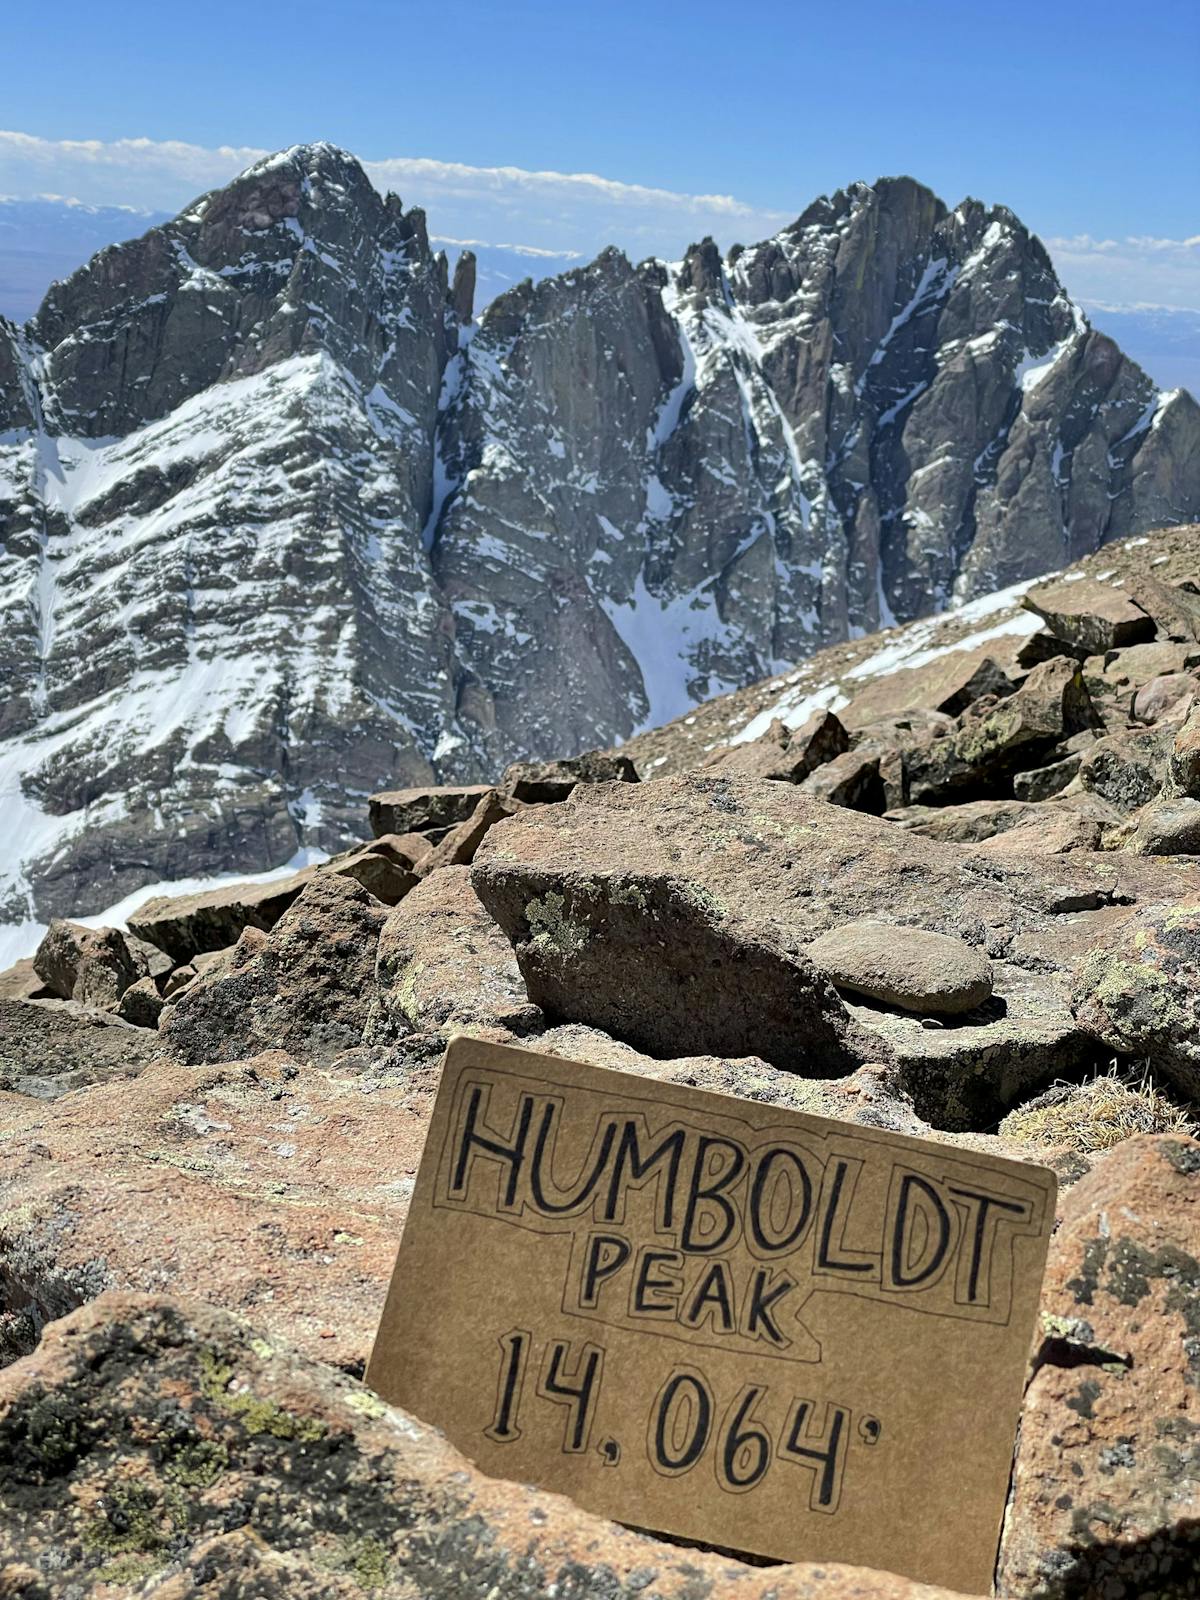 Photo of my summit sign on top of Humboldt Peak. Crestone Peak & Needle are visible in the background.